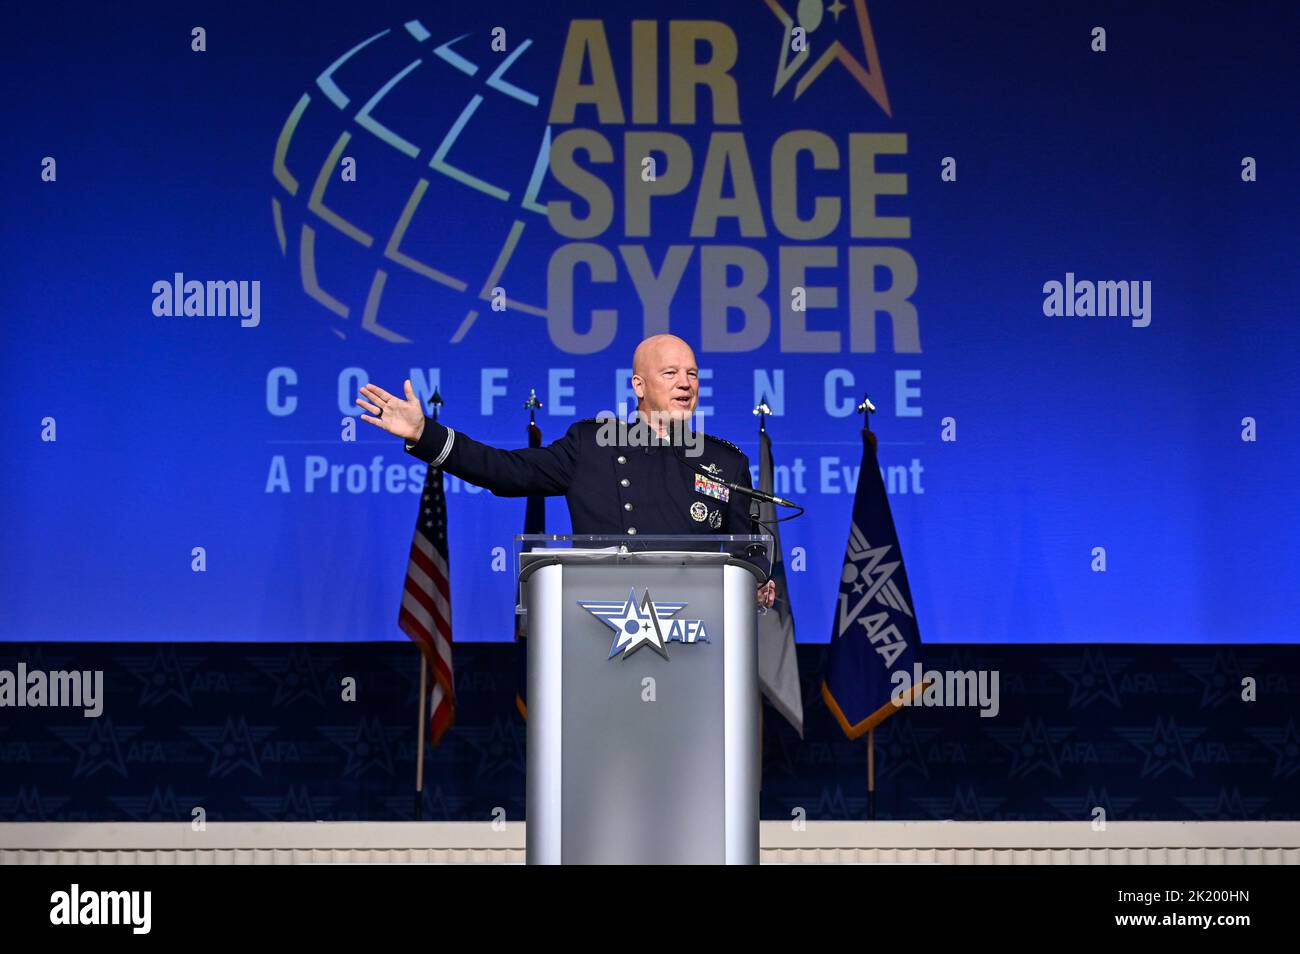 National Harbor, United States of America. 20 September, 2022. U.S. Space Force Chief of Space Operations Gen. John “Jay” Raymond delivers a keynote address on the state of the Space Force during the 2022 Air, Space and Cyber Conference September 20, 2022 in National Harbor, Maryland, USA. Credit: Eric Dietrich/U.S. Space Force photo/Alamy Live News Stock Photo